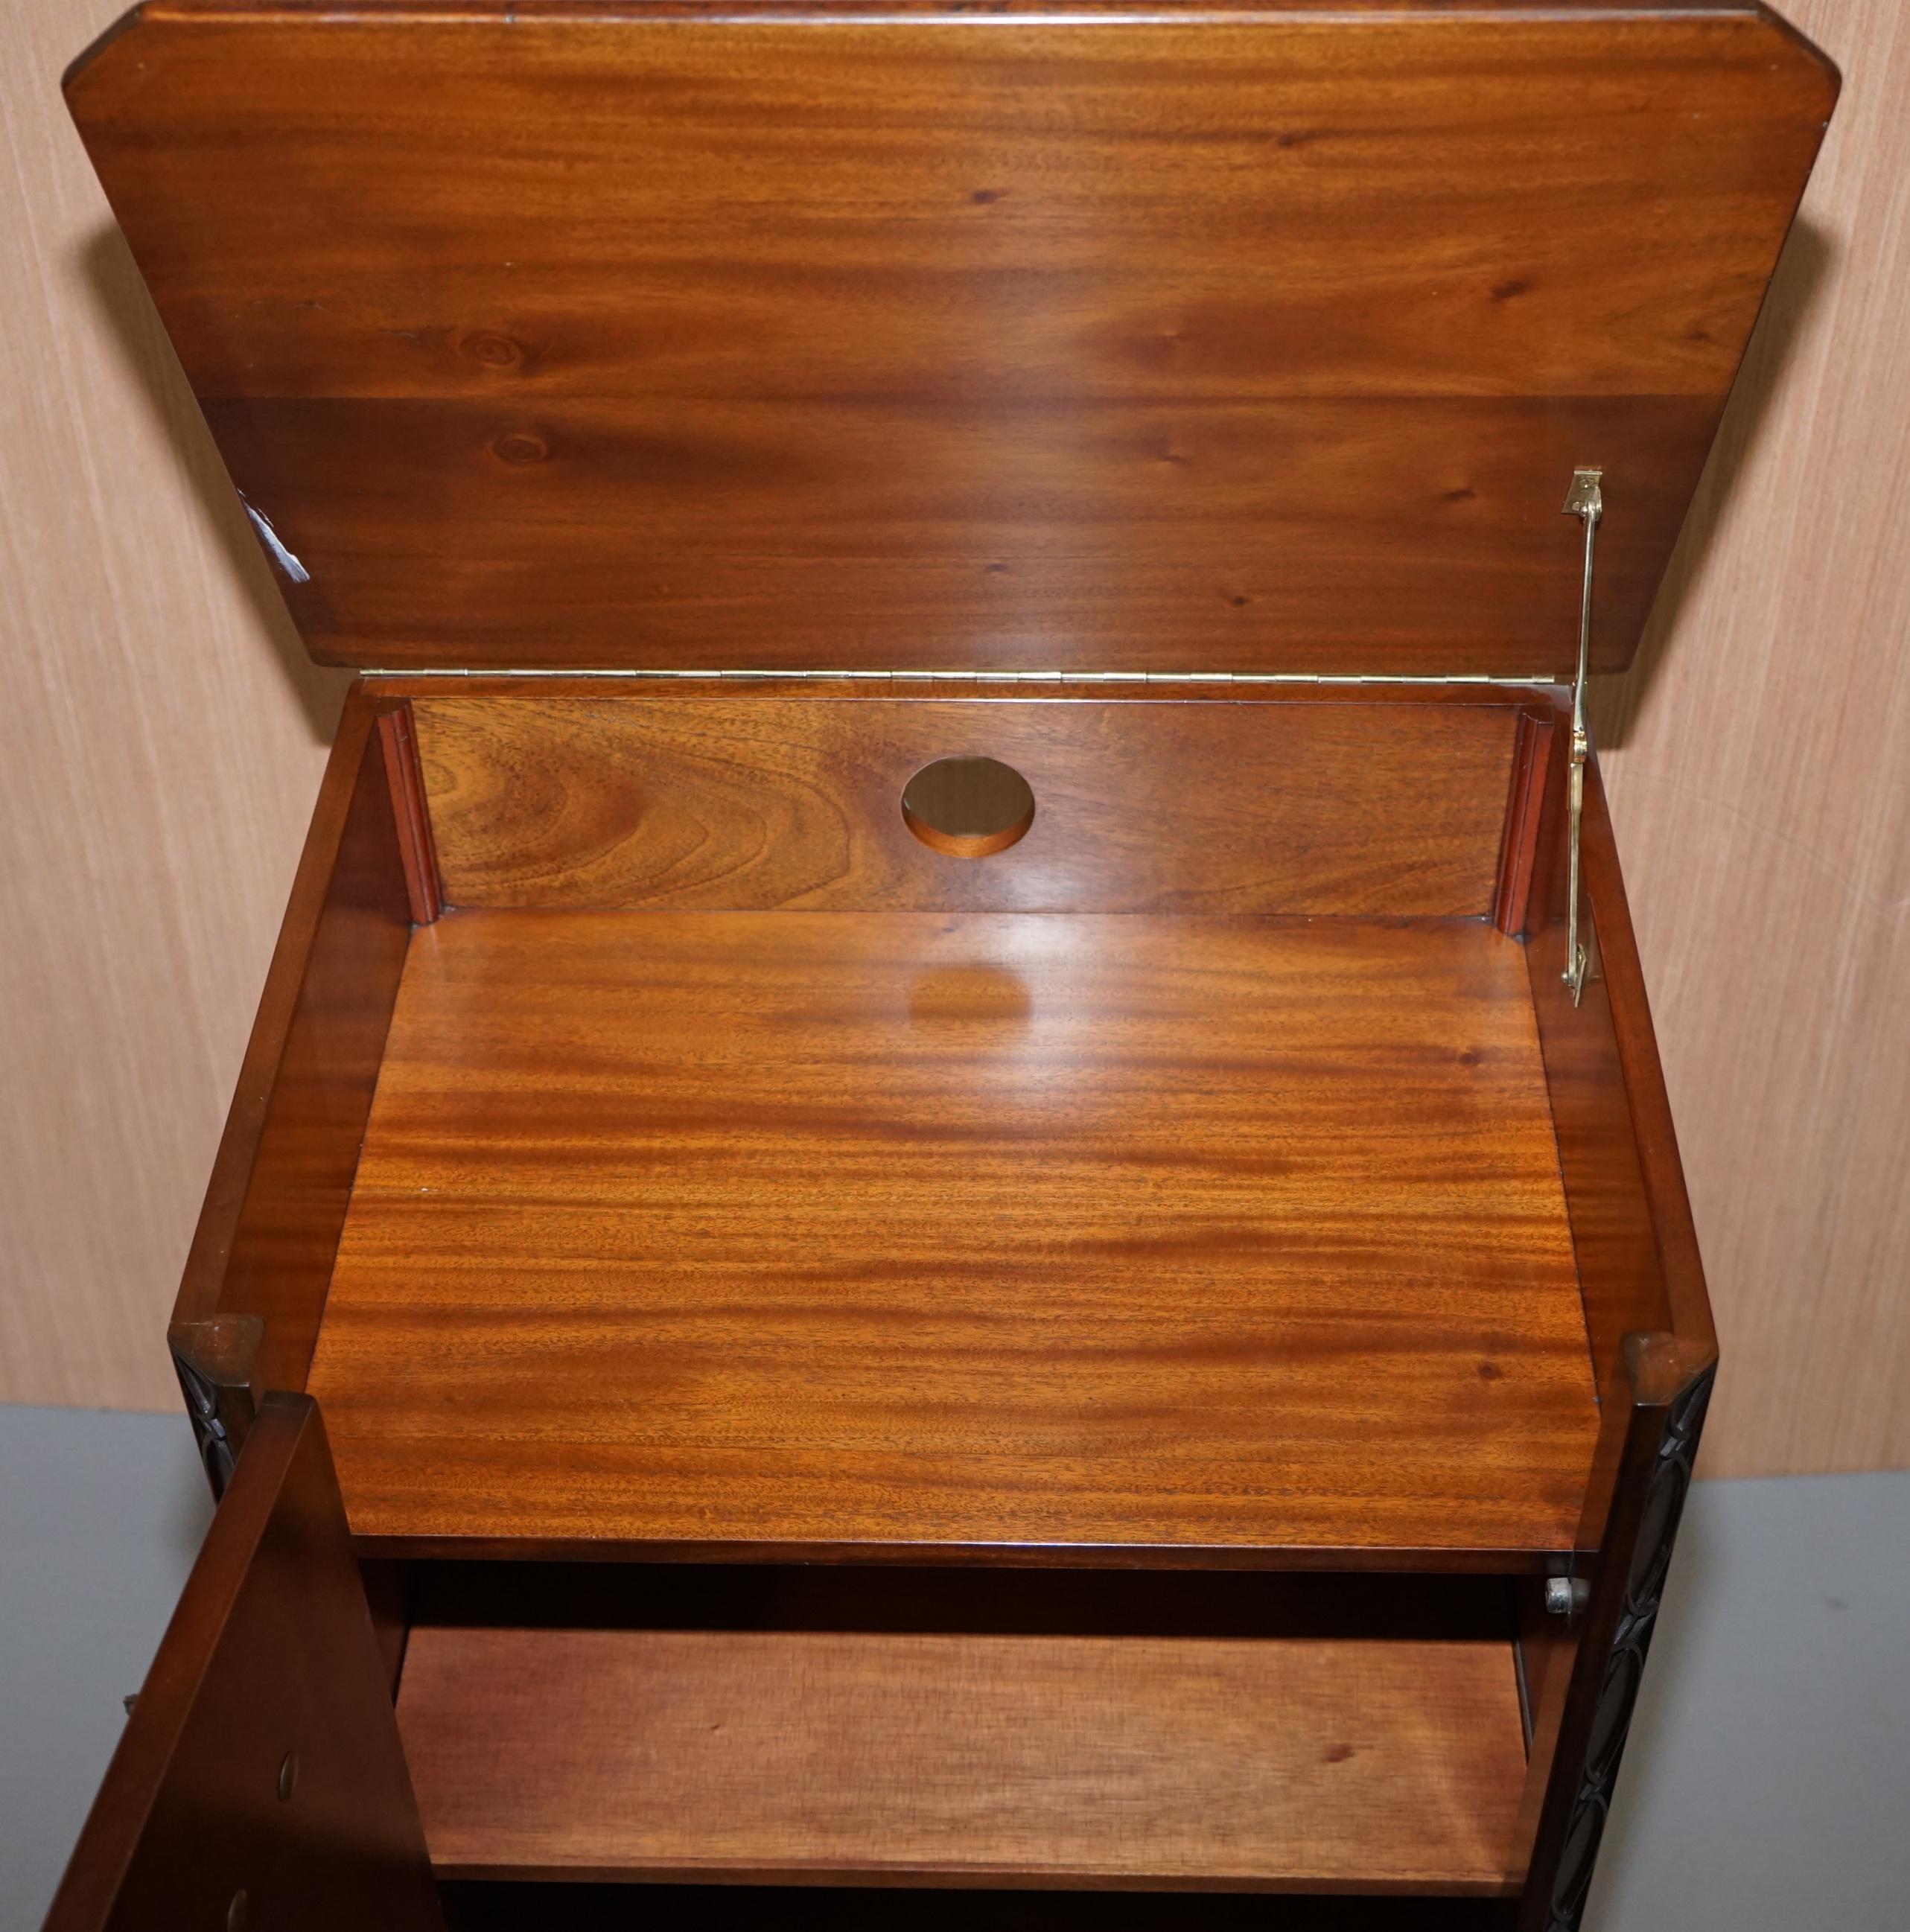 Stunning Record Player Cabinet Cupboard Hidden as Regency Chest of Drawers 7